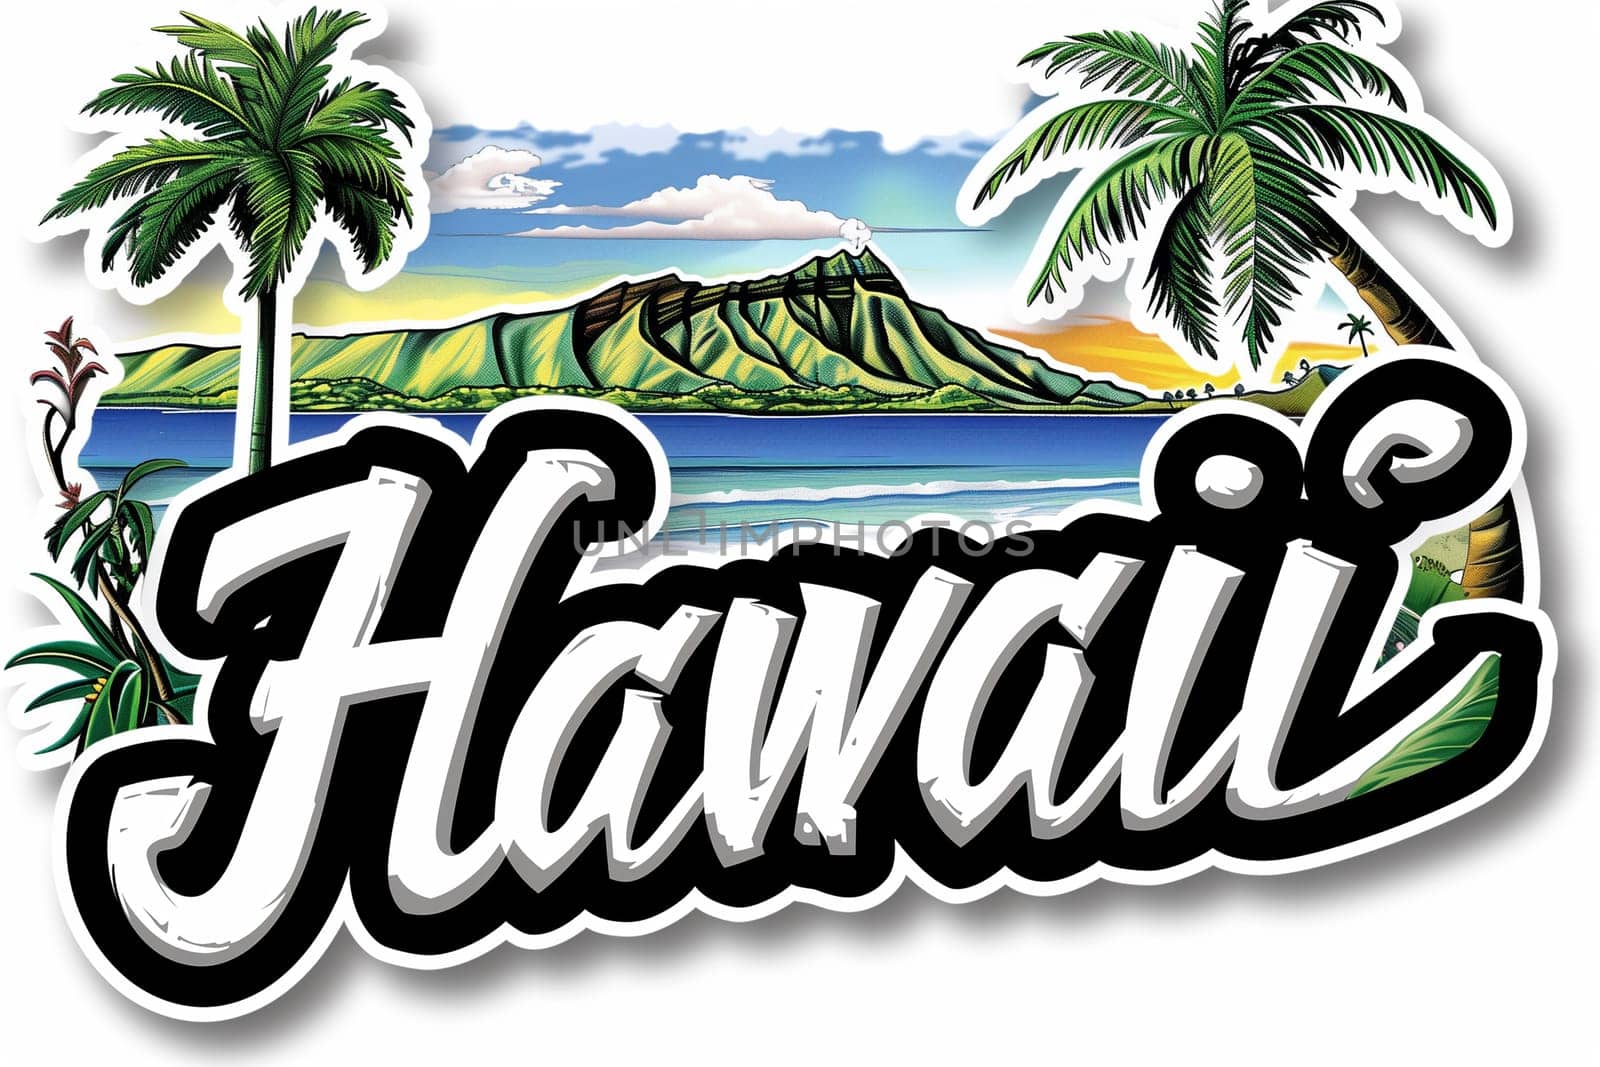 Hawaii Sticker Surrounded by Tropical Flowers and Palm Trees by Sd28DimoN_1976